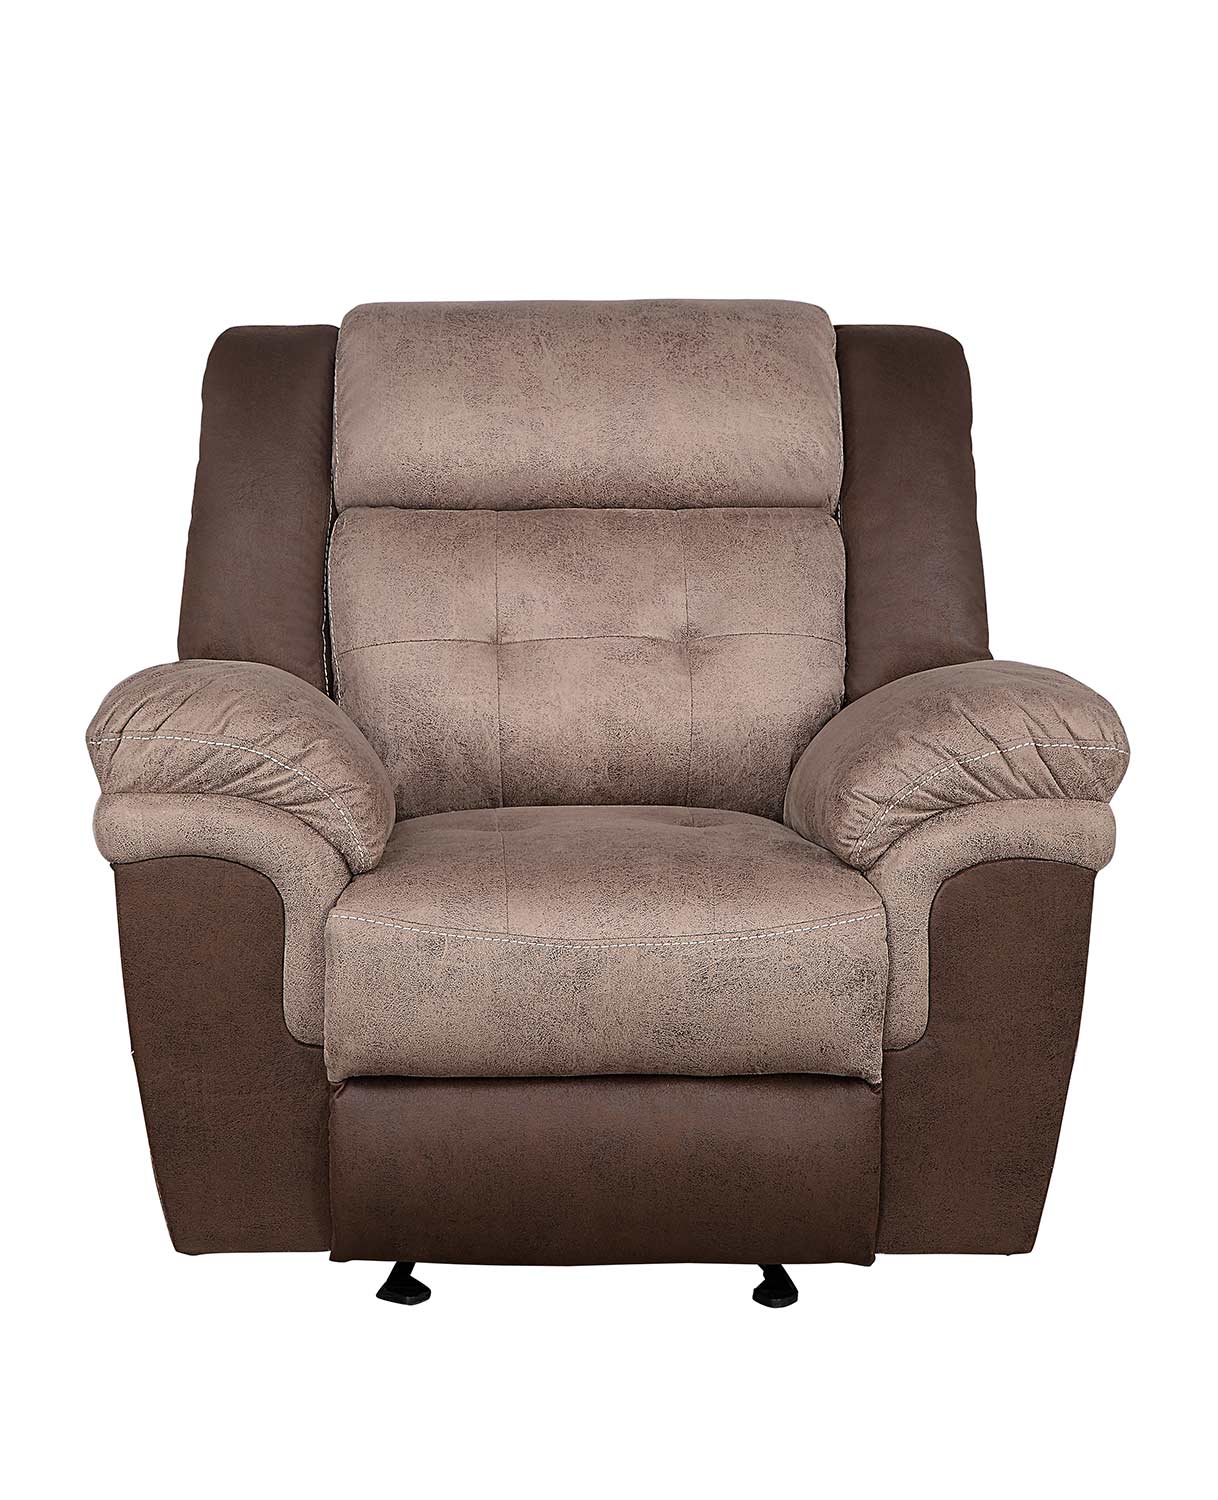 Homelegance Chai Glider Reclining Chair - Brown and dark brown polished microfiber